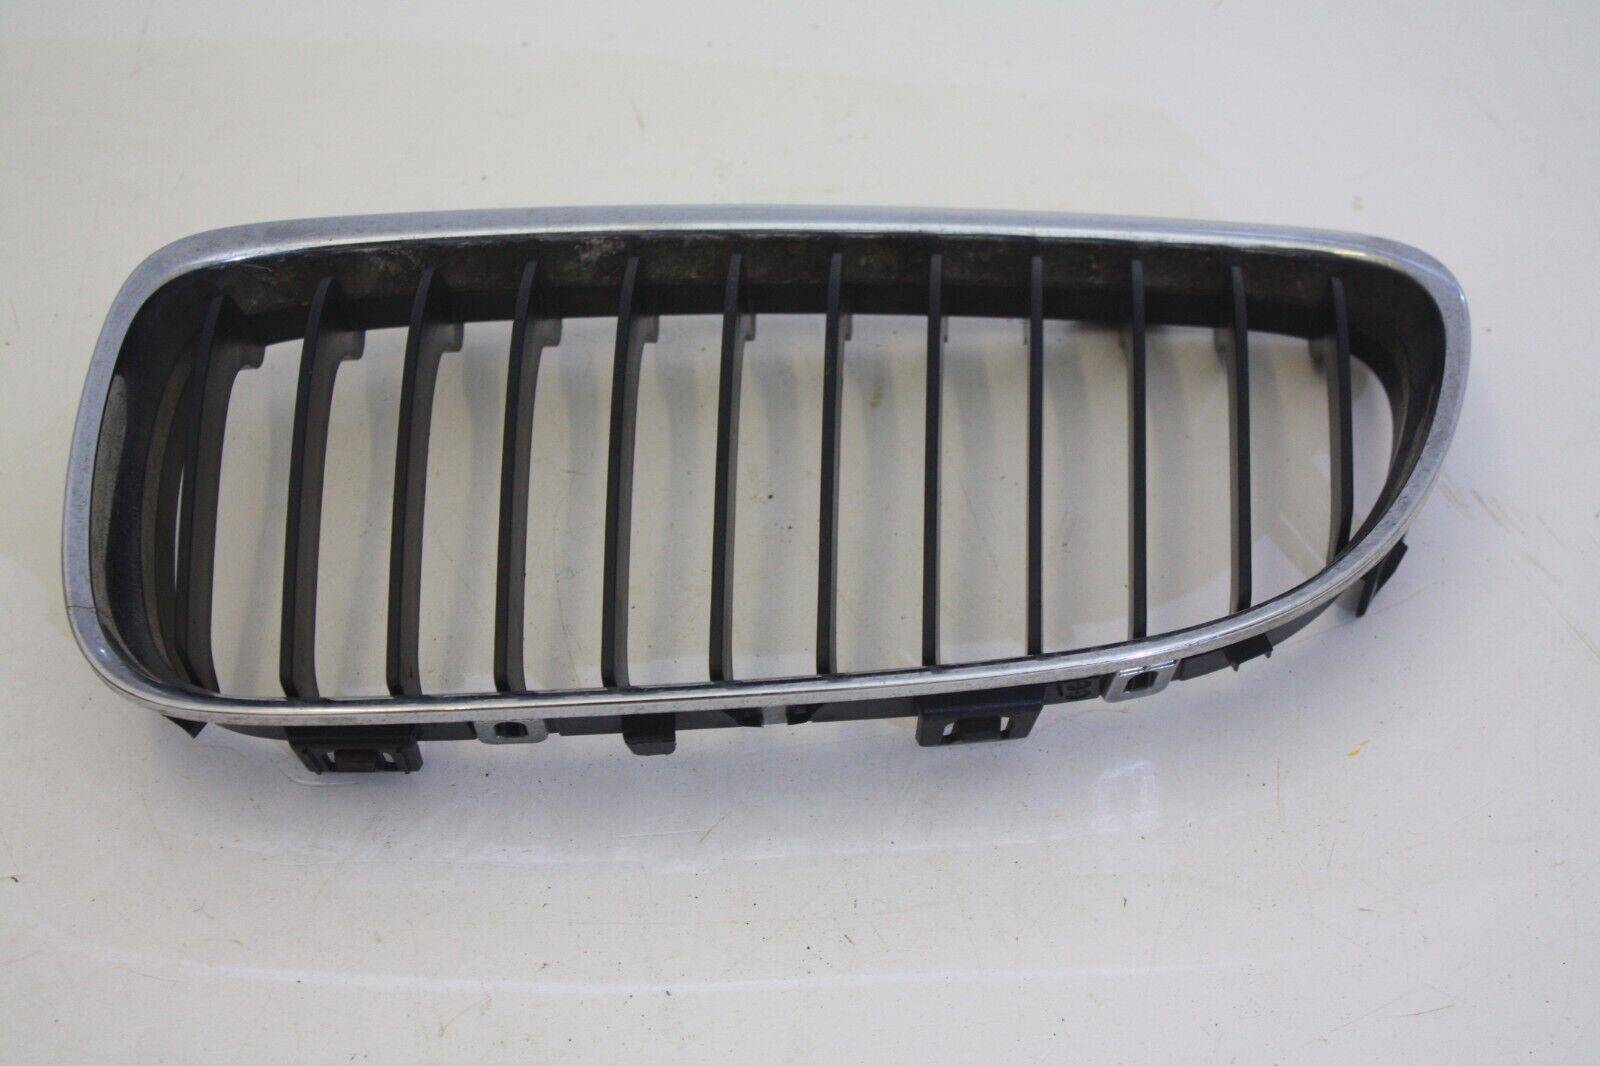 BMW-3-Series-E90-LCI-Front-Bumper-Left-Kidney-Grill-2008-TO-2012-51137201967-176234542894-3